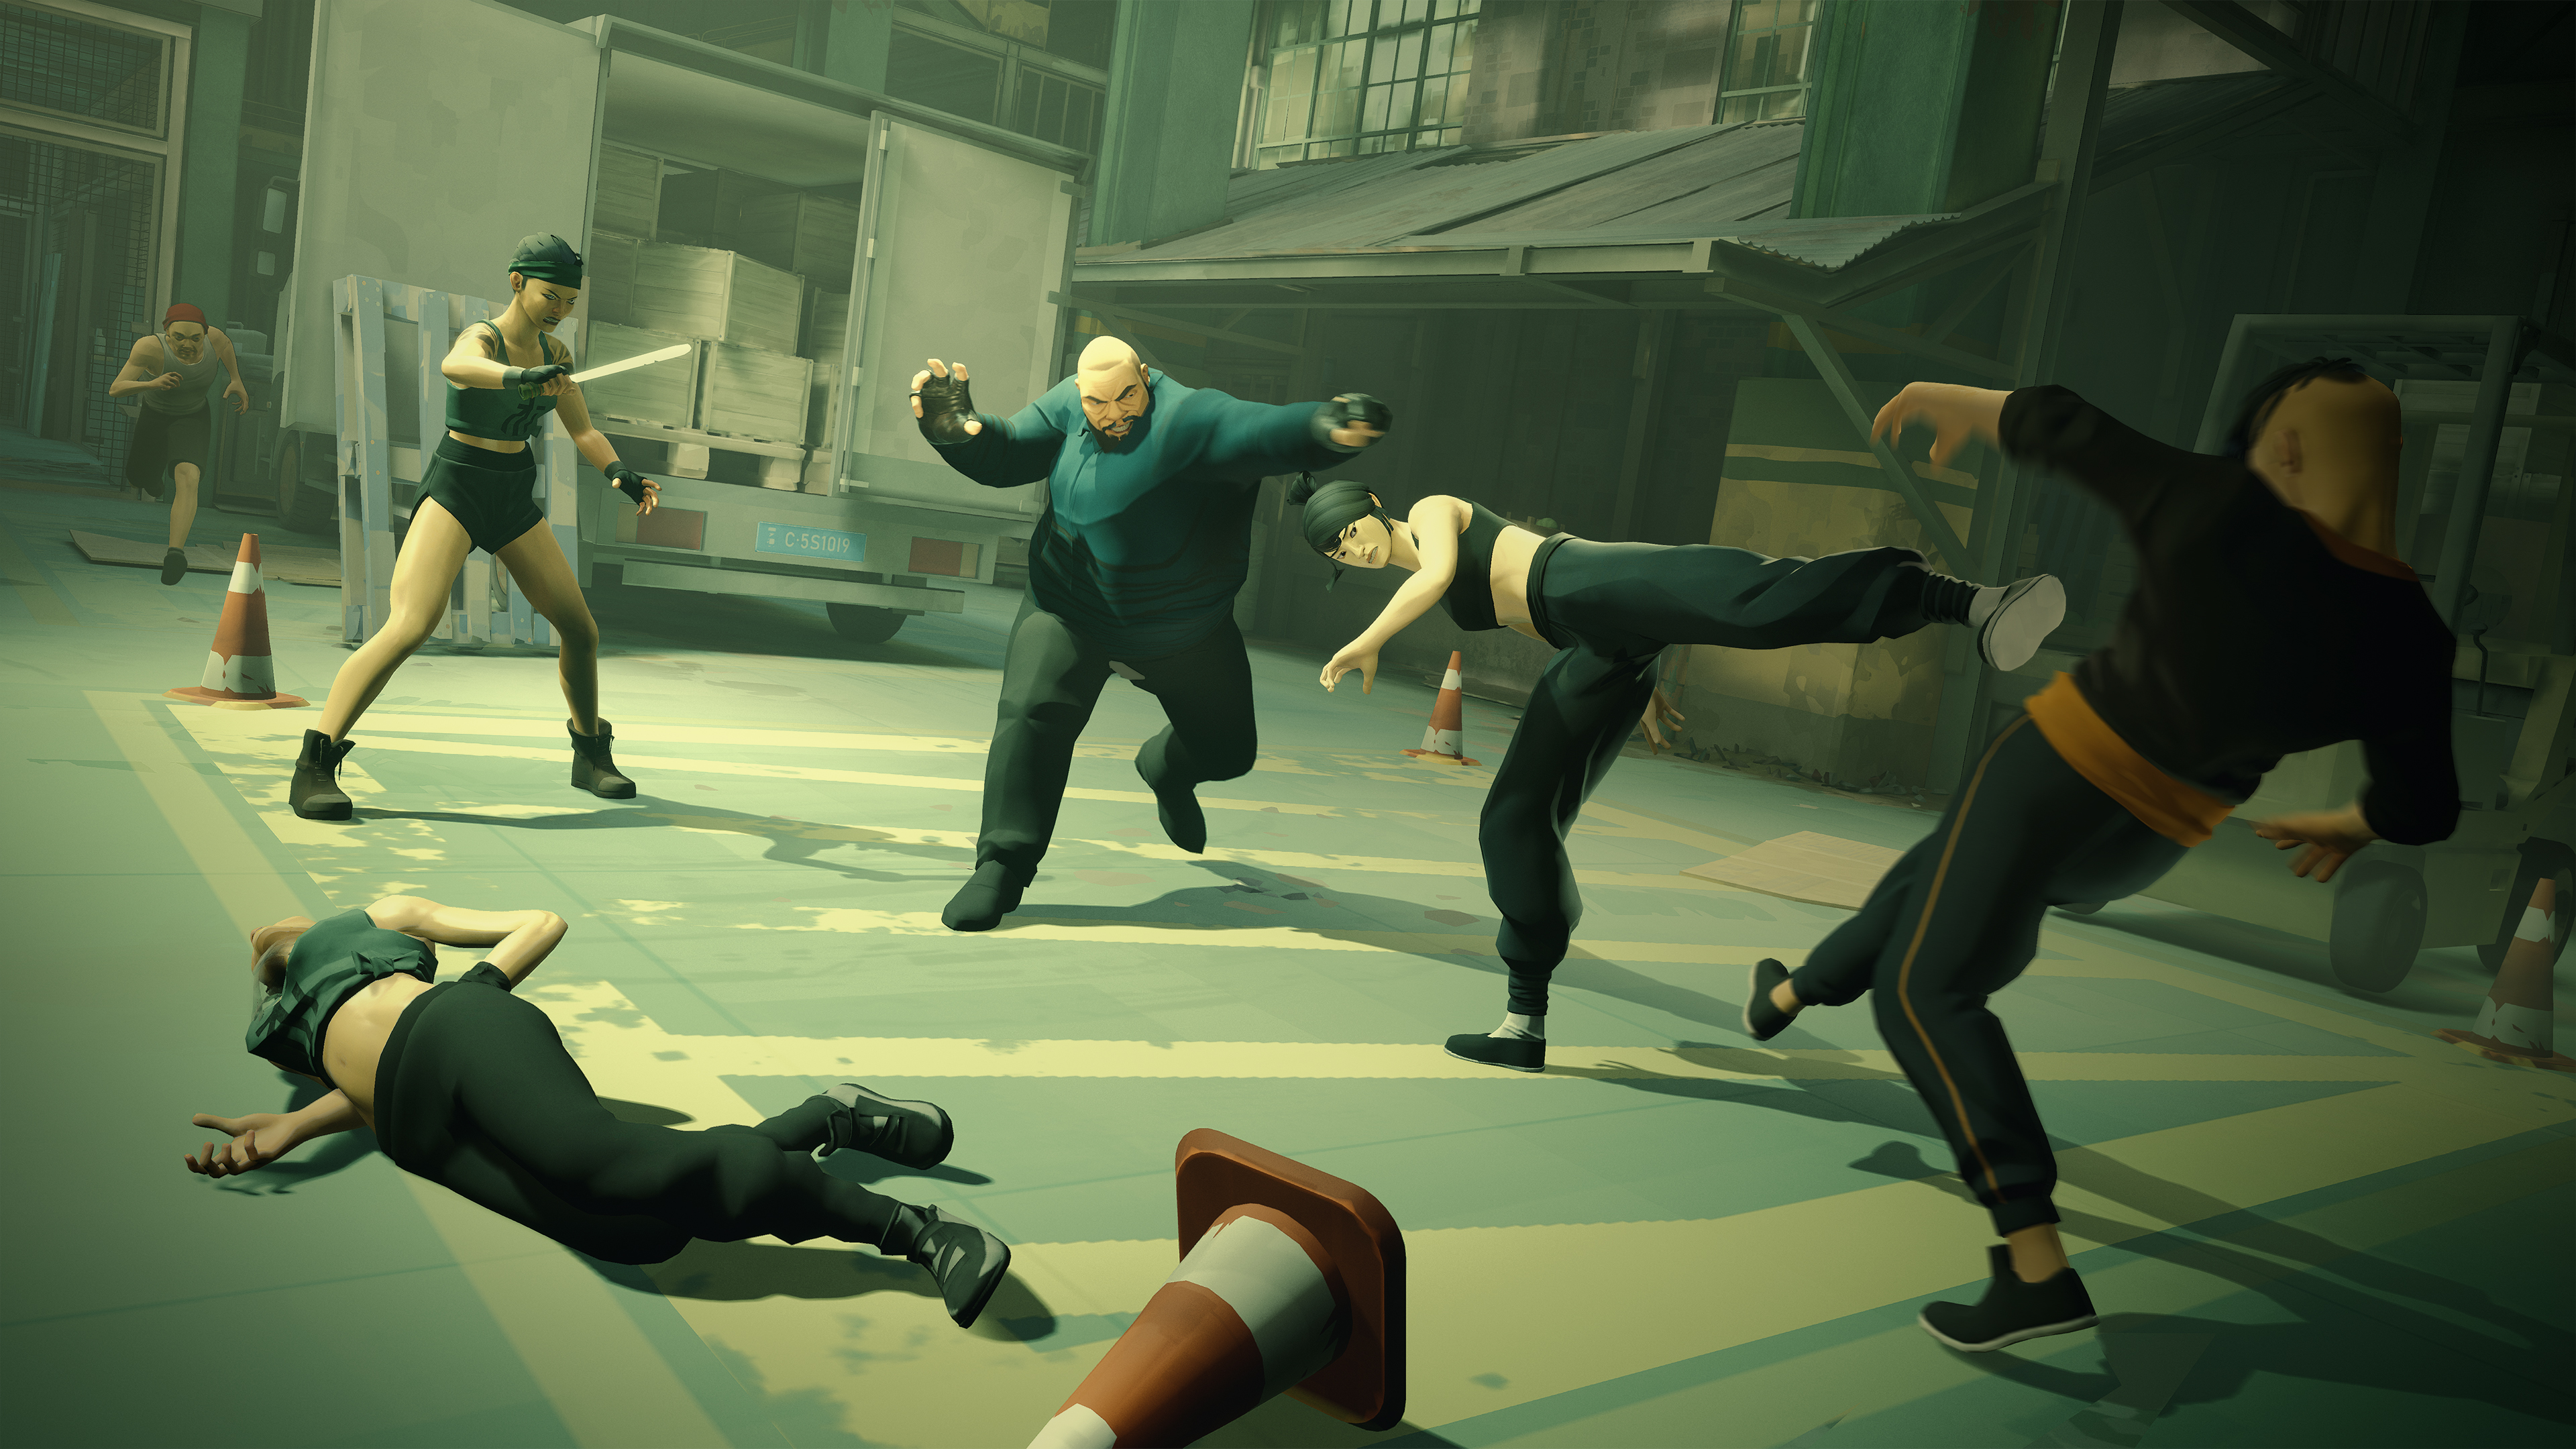 Sifu punches free from PlayStation and Switch exclusivity in late March